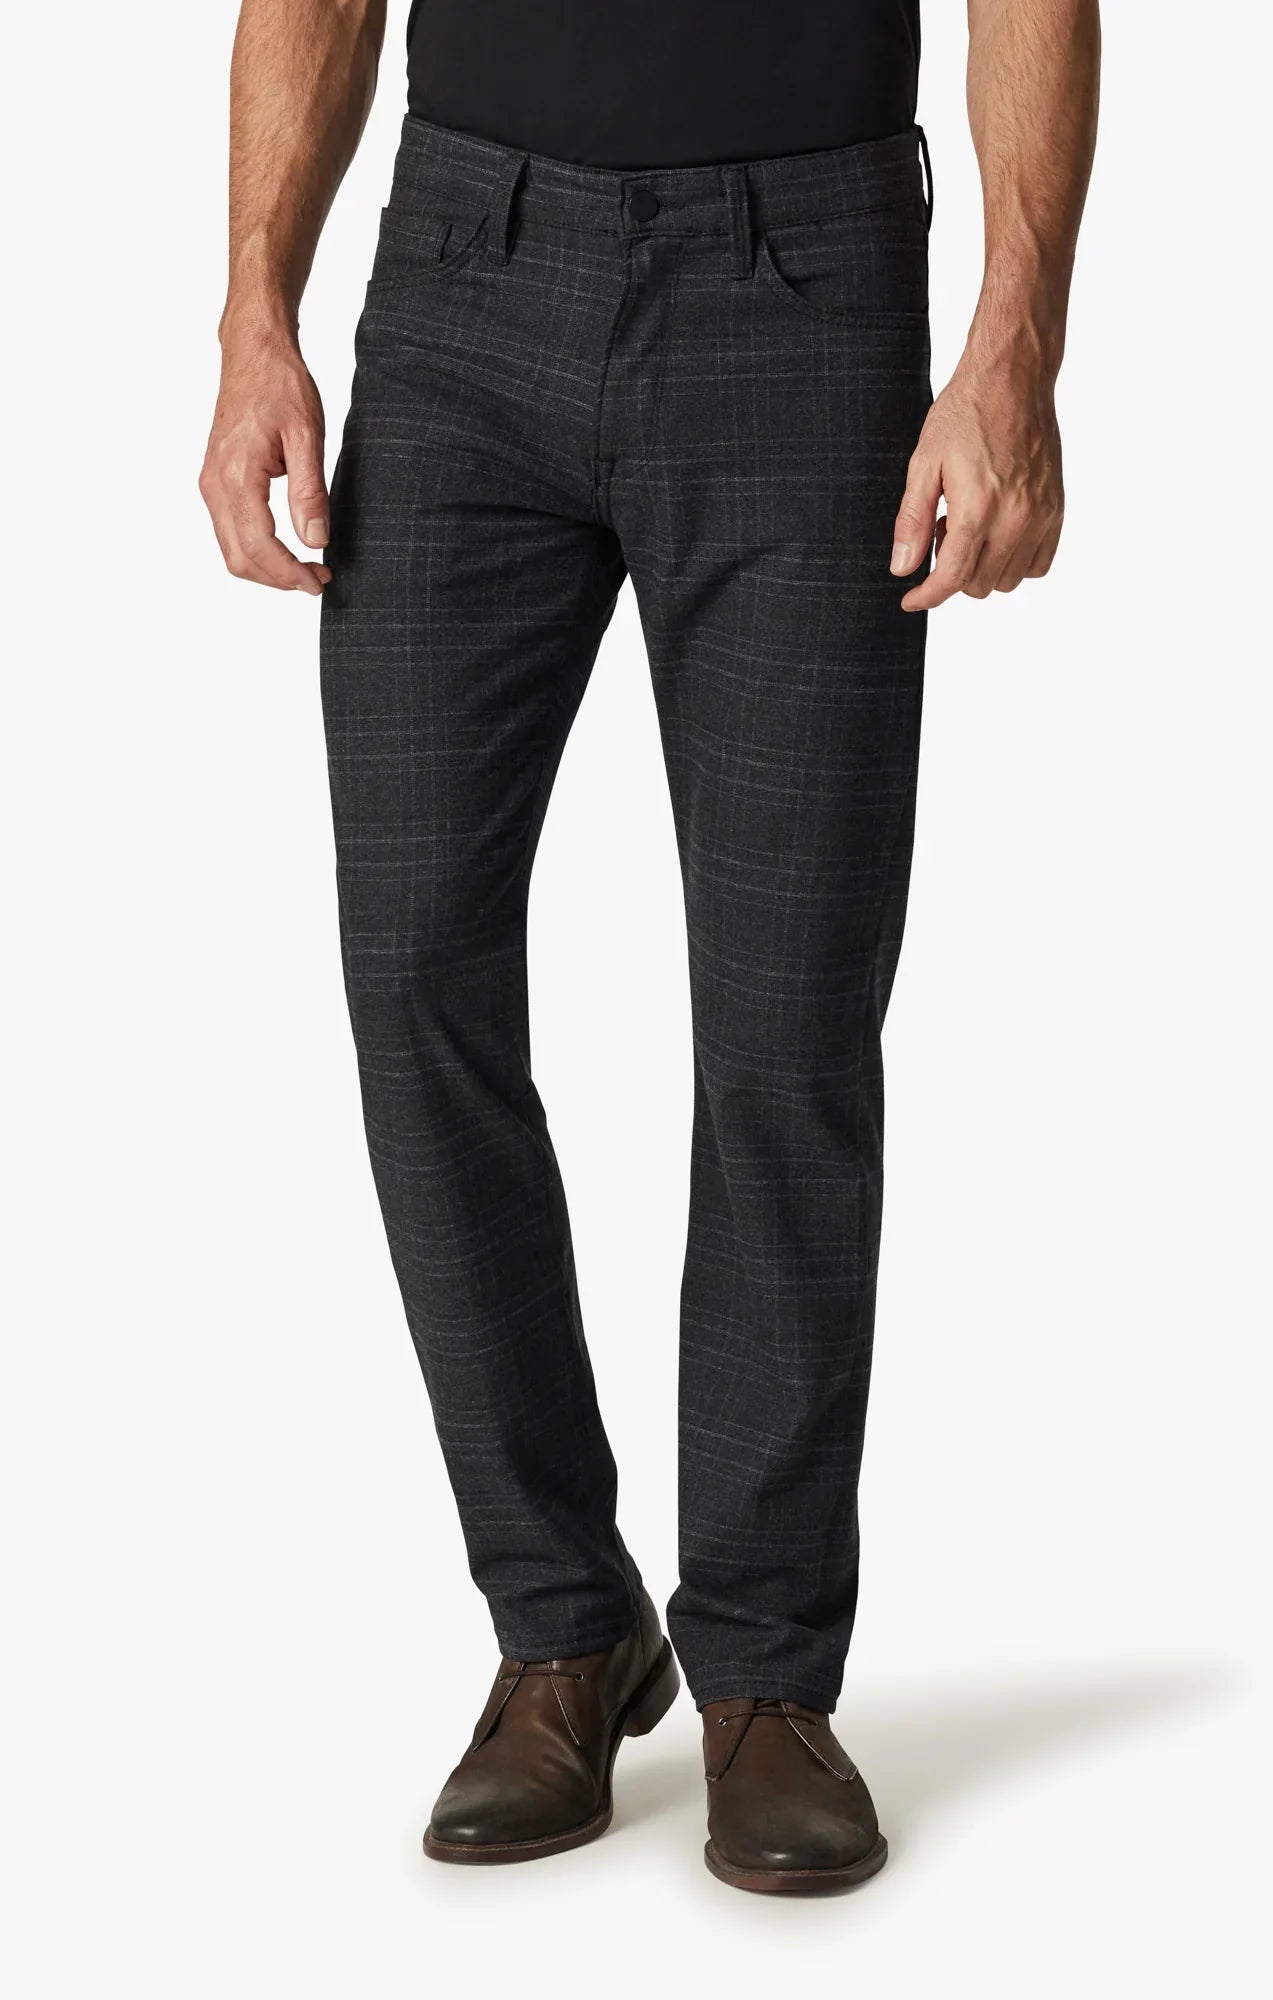 34 Heritage - Courage Grey Checked - Pants-Men&#39;s Pants-35-Yaletown-Vancouver-Surrey-Canada